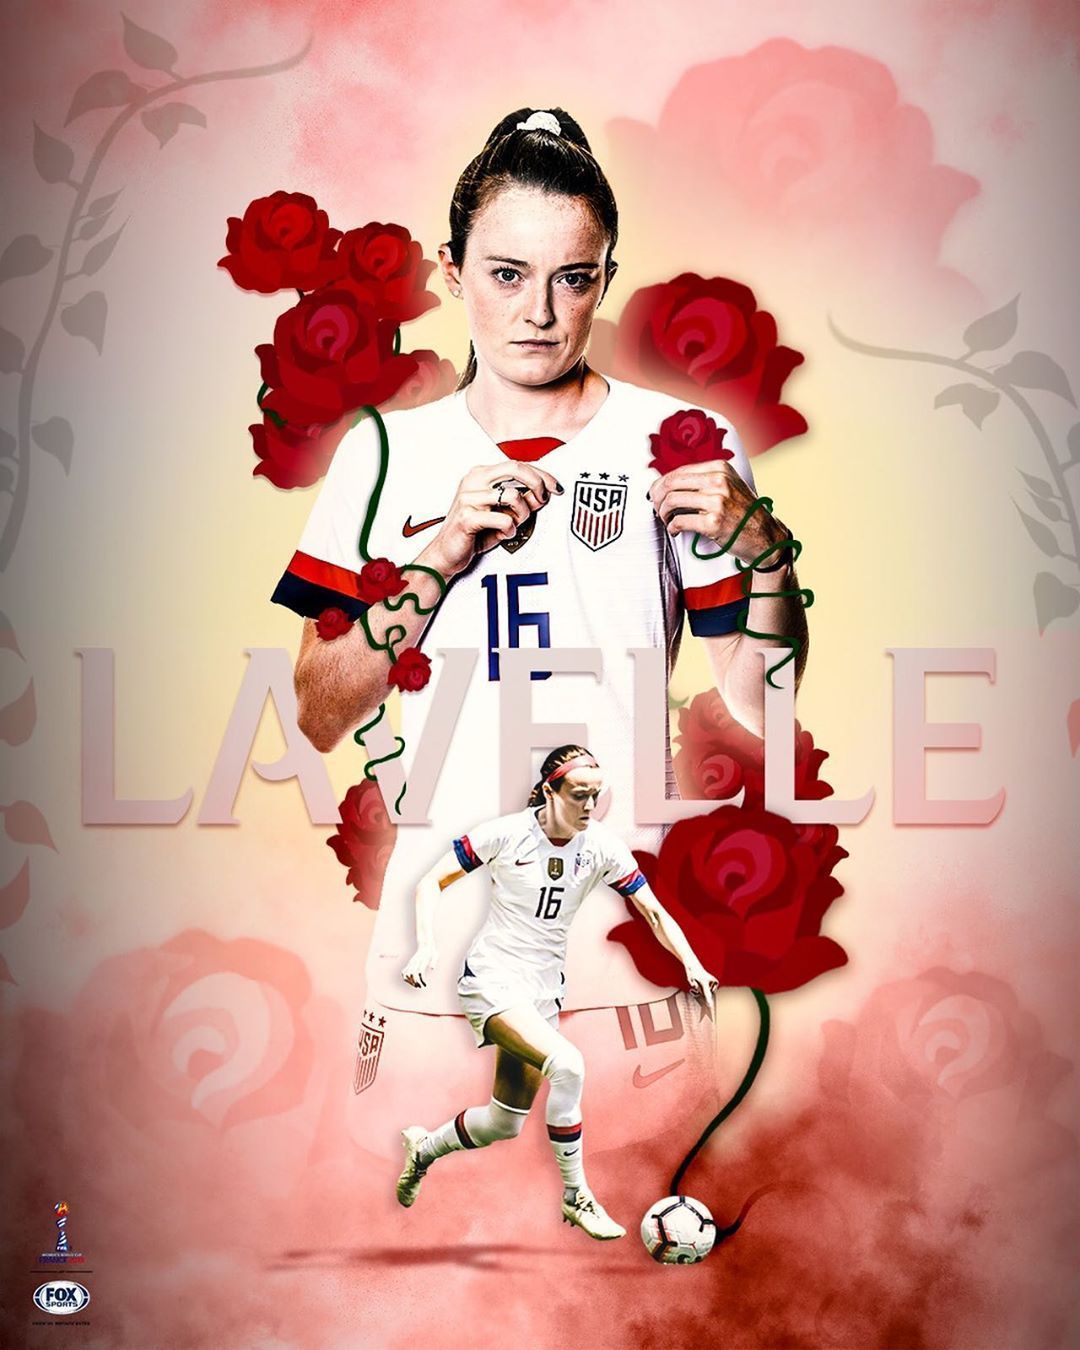 FOX Soccer on Instagram: “ROSE LAVELLE! EVERY ROSE HAS ITS GOAL! 2- USA!